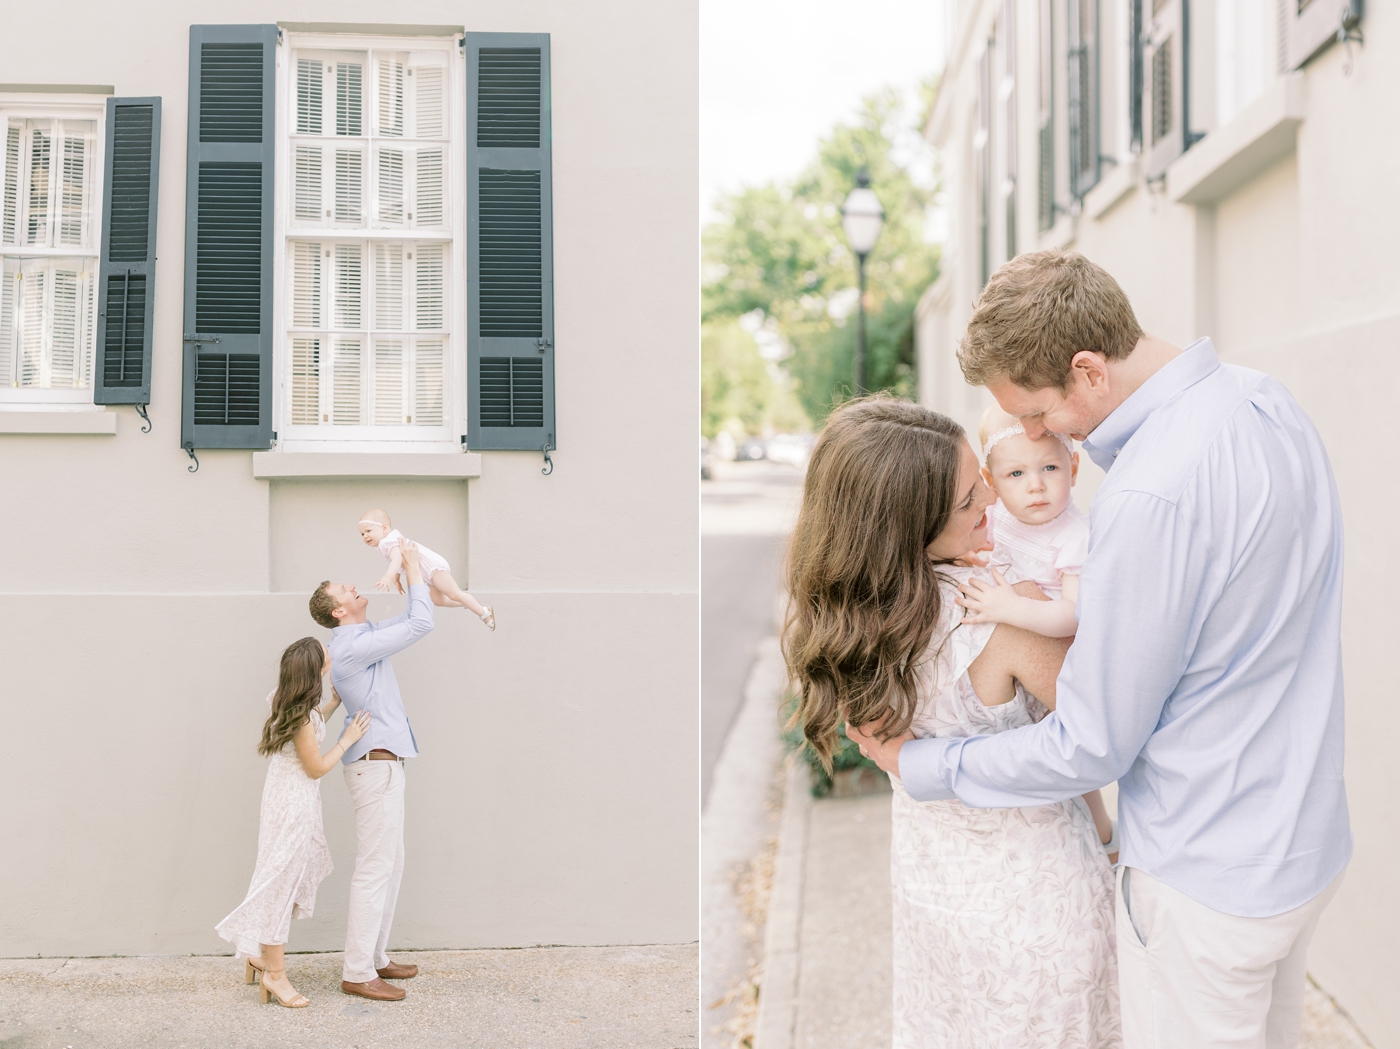 Dad mom and baby snuggling together in front of shuttered window downtown during her 18month session| Photo by Caitlyn Motycka Photography.